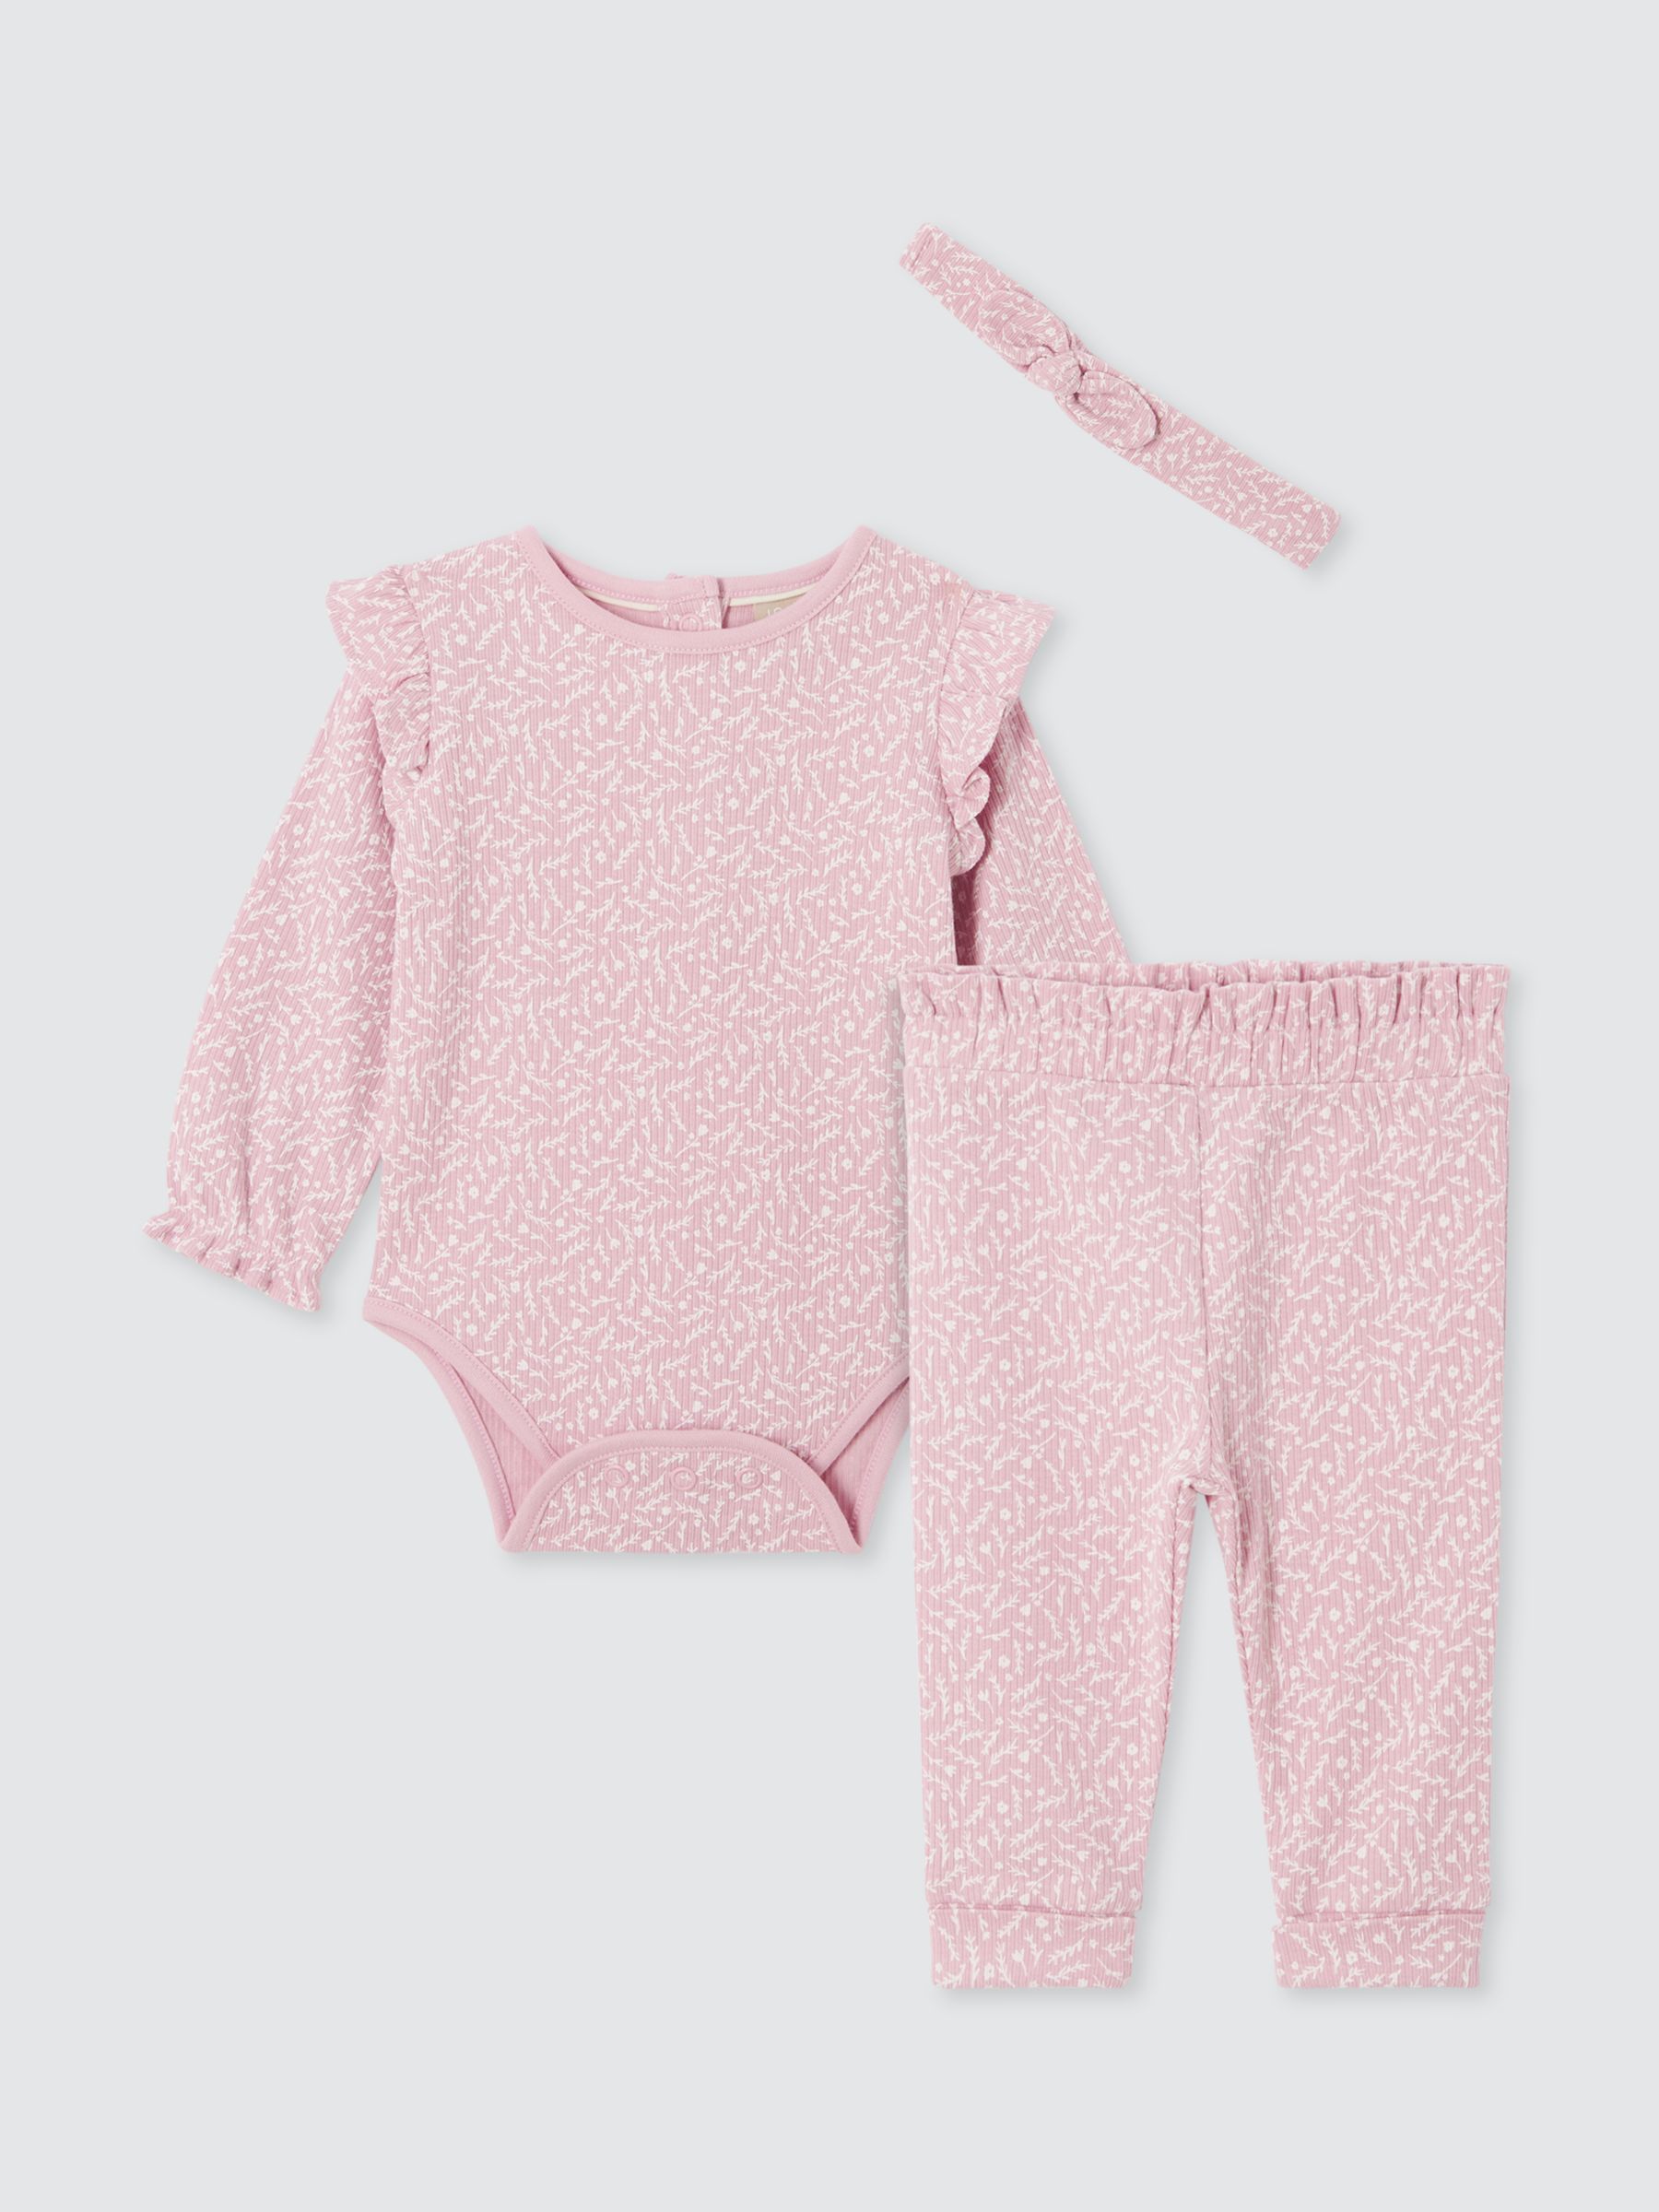 John Lewis Baby Floral Bodysuit, Trousers and Headband Set, Pink, 3-6 months